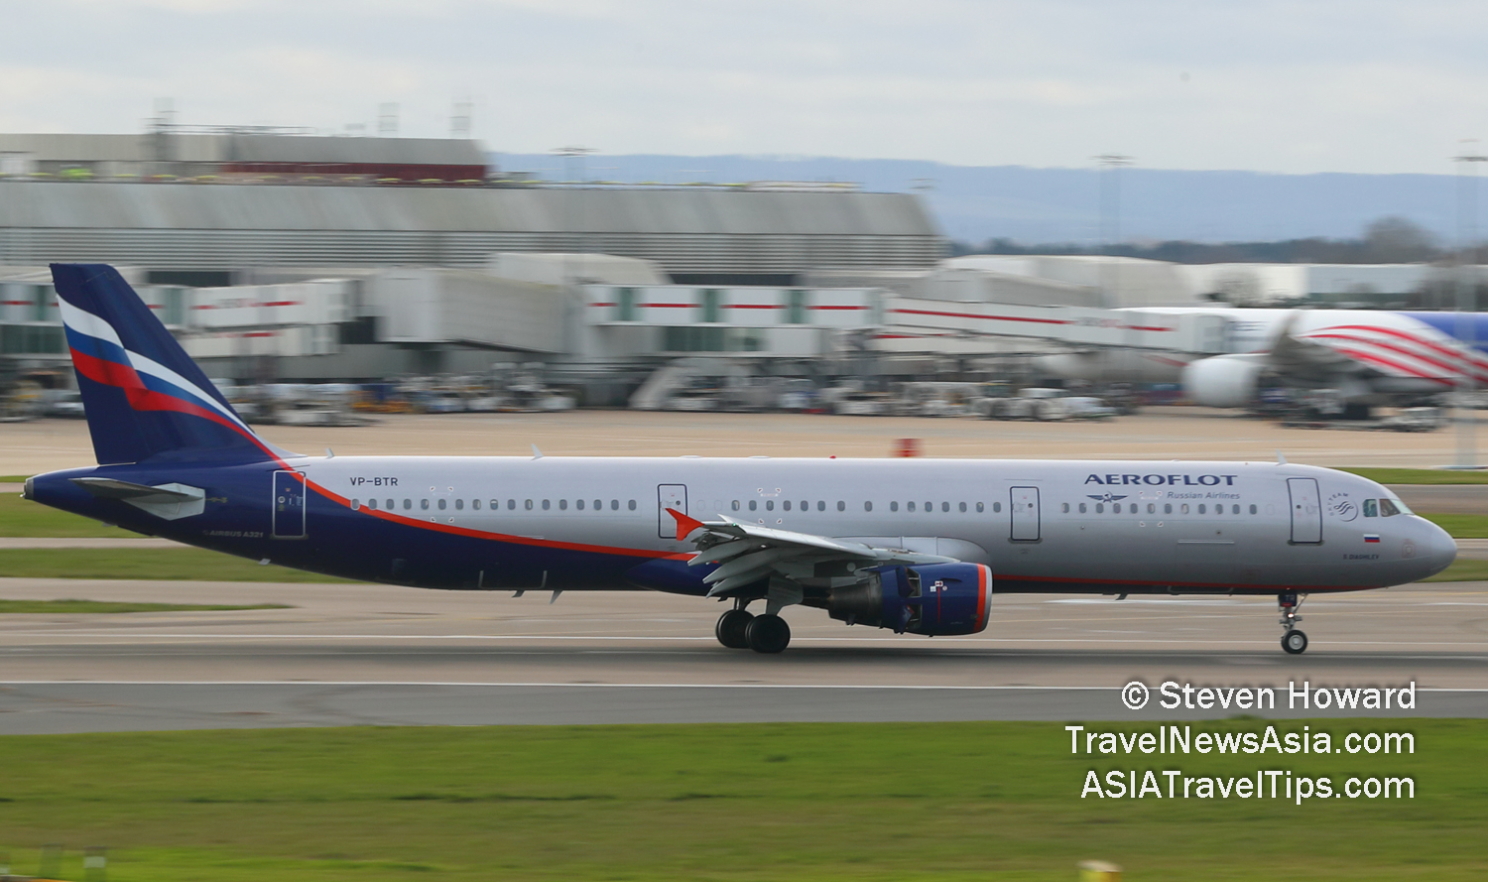 Aeroflot A321 reg: VP-BTR. Picture by Steven Howard of TravelNewsAsia.com. Click to enlarge.